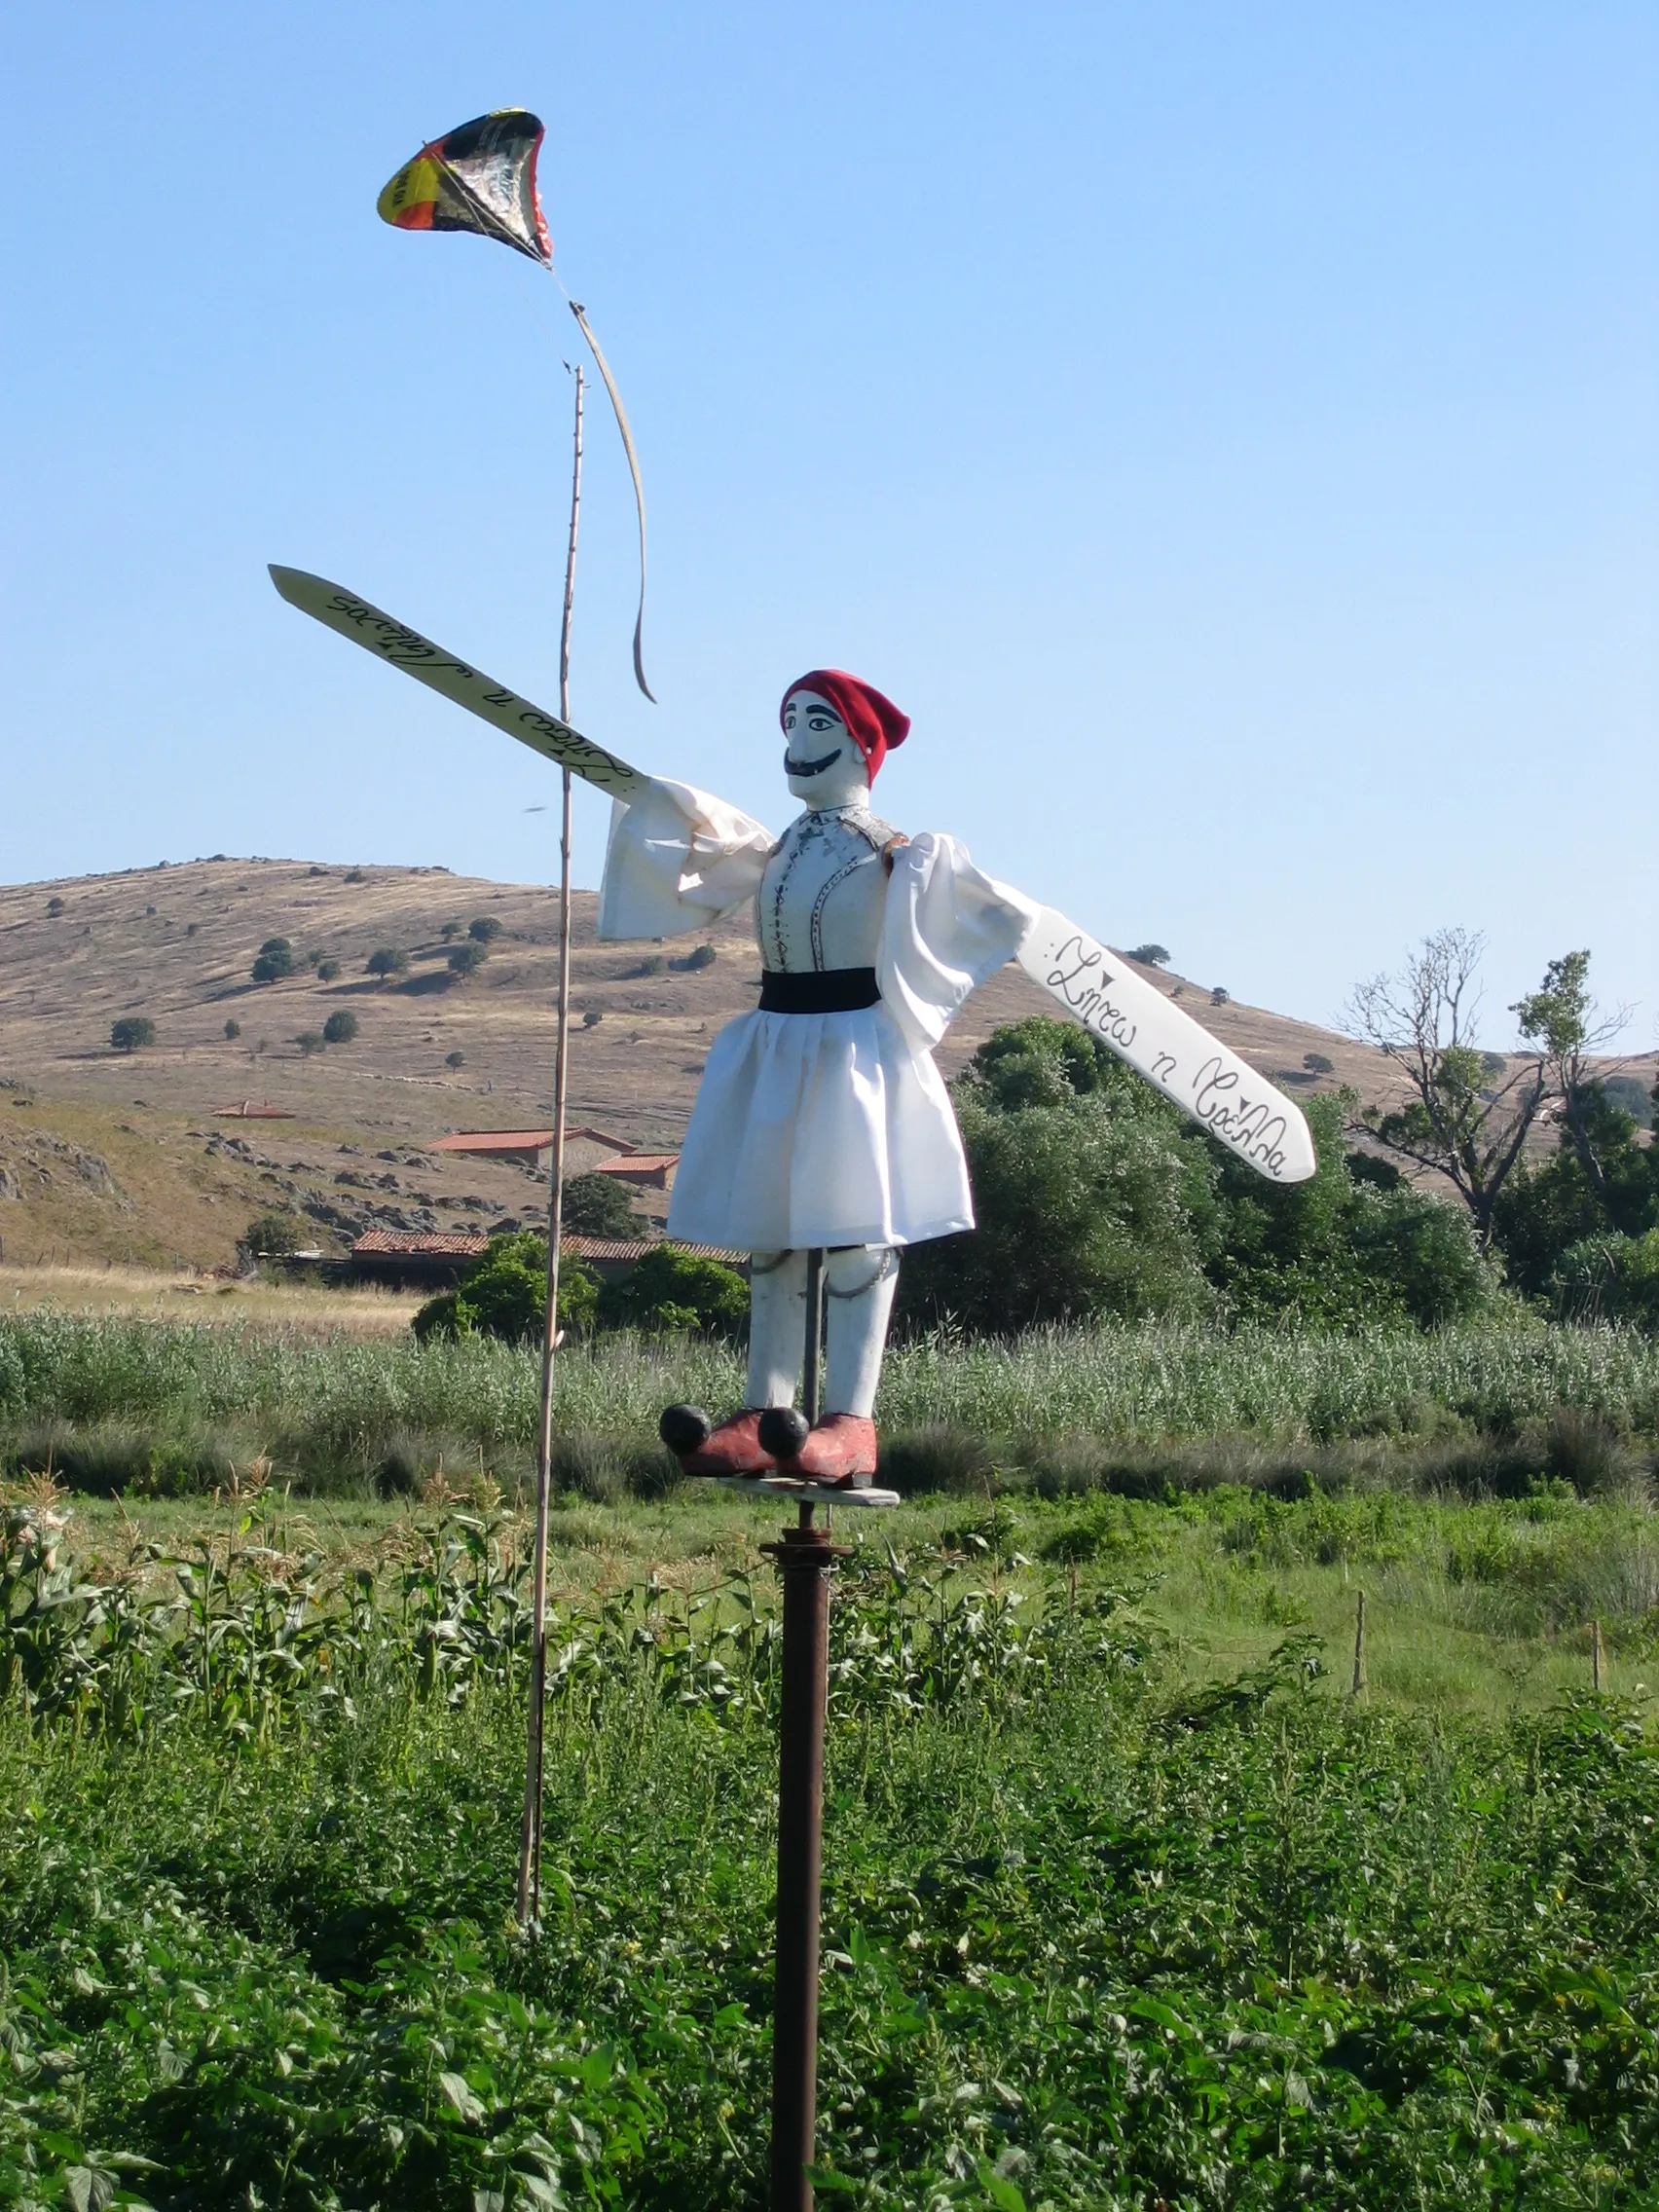 Photo showing: Crops in Greece tend to include scarecrows. This one, on a crop field in the island of Lemnos, Greece, has the form of an Evzonas, a Greek soldier dressed in traditional clothing. Its arms have the shape of oars, so the dummy rotates depending on the wind's direction. In the left arm it is written, in Greek calligraphic script "Long live madness" (Ζήτω η τρέλλα), while in the right arm it is written "Long live Lemnos" (Ζήτω η Λήμνος).